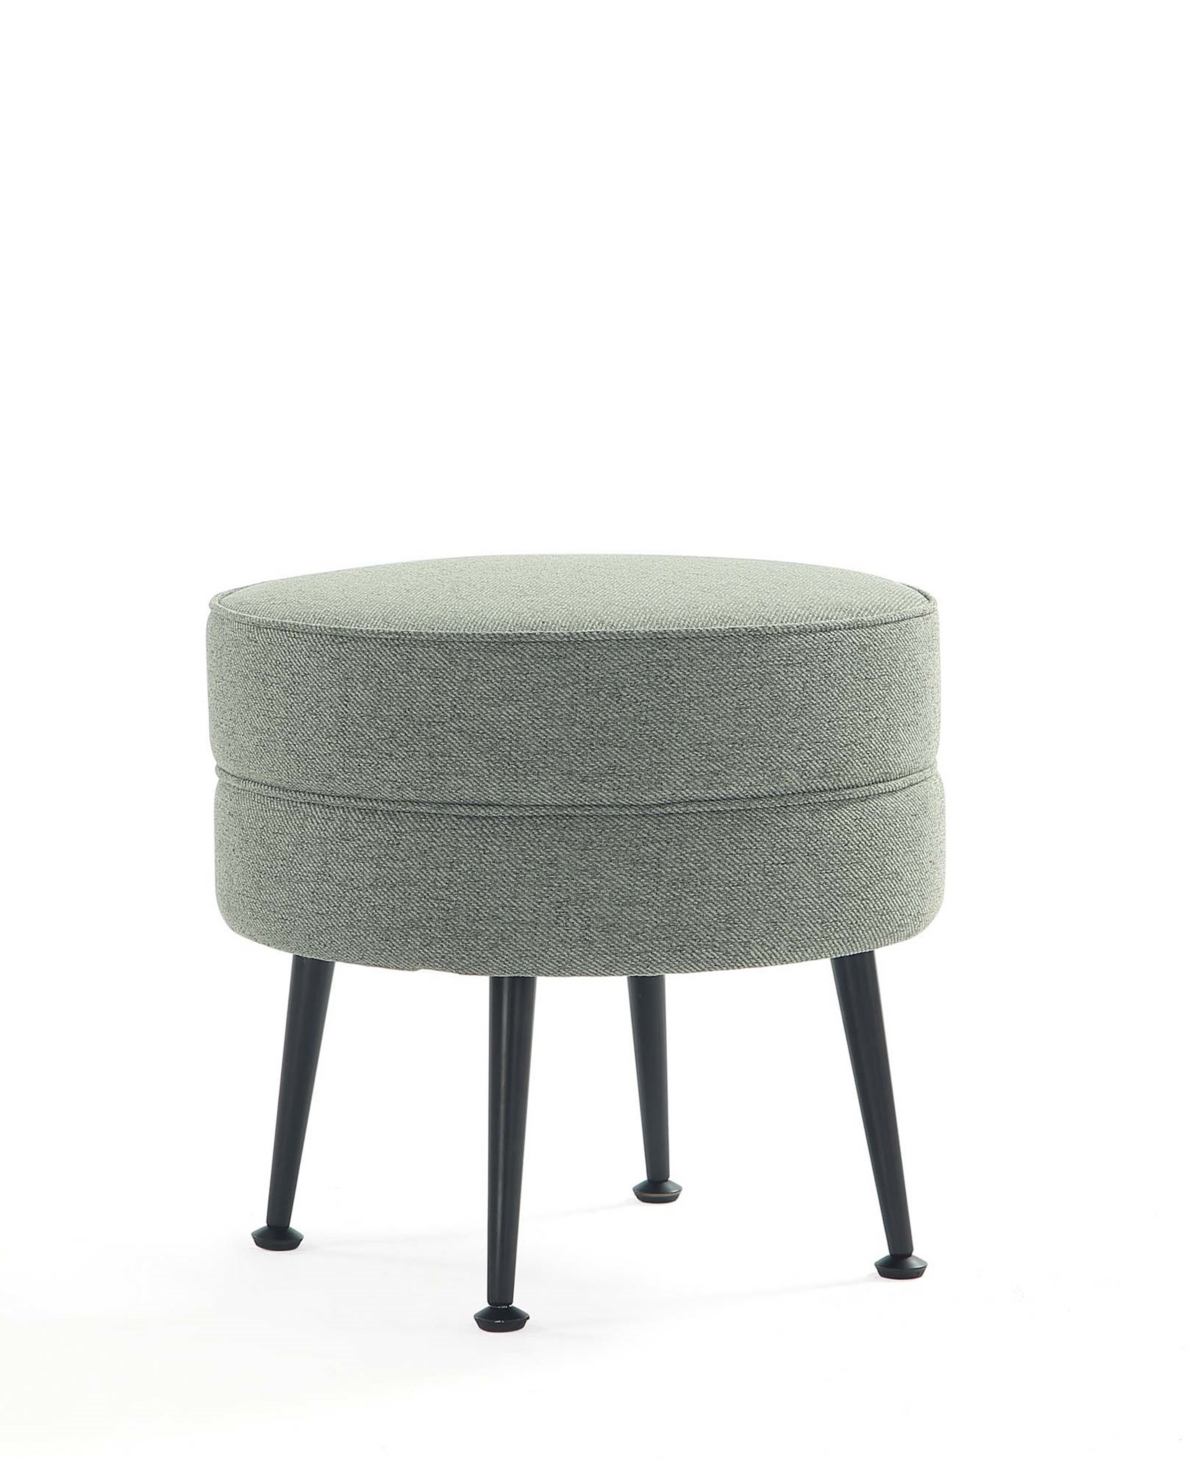 Manhattan Comfort Bailey 18.11" Woven Polyester Blend Upholstered Rubberwood Ottoman In Sage